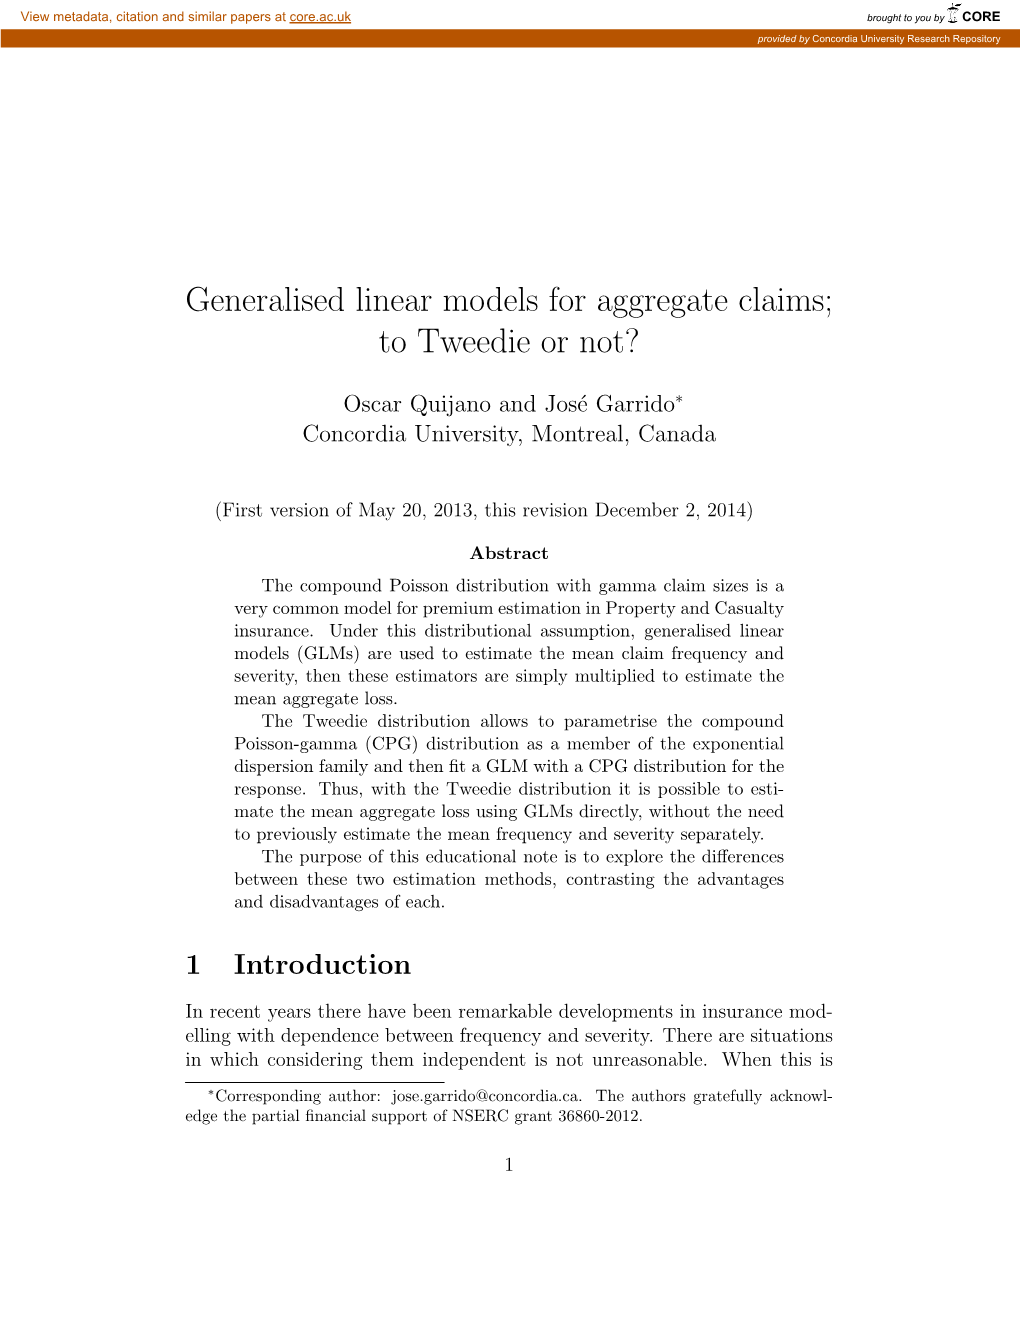 Generalised Linear Models for Aggregate Claims; to Tweedie Or Not?